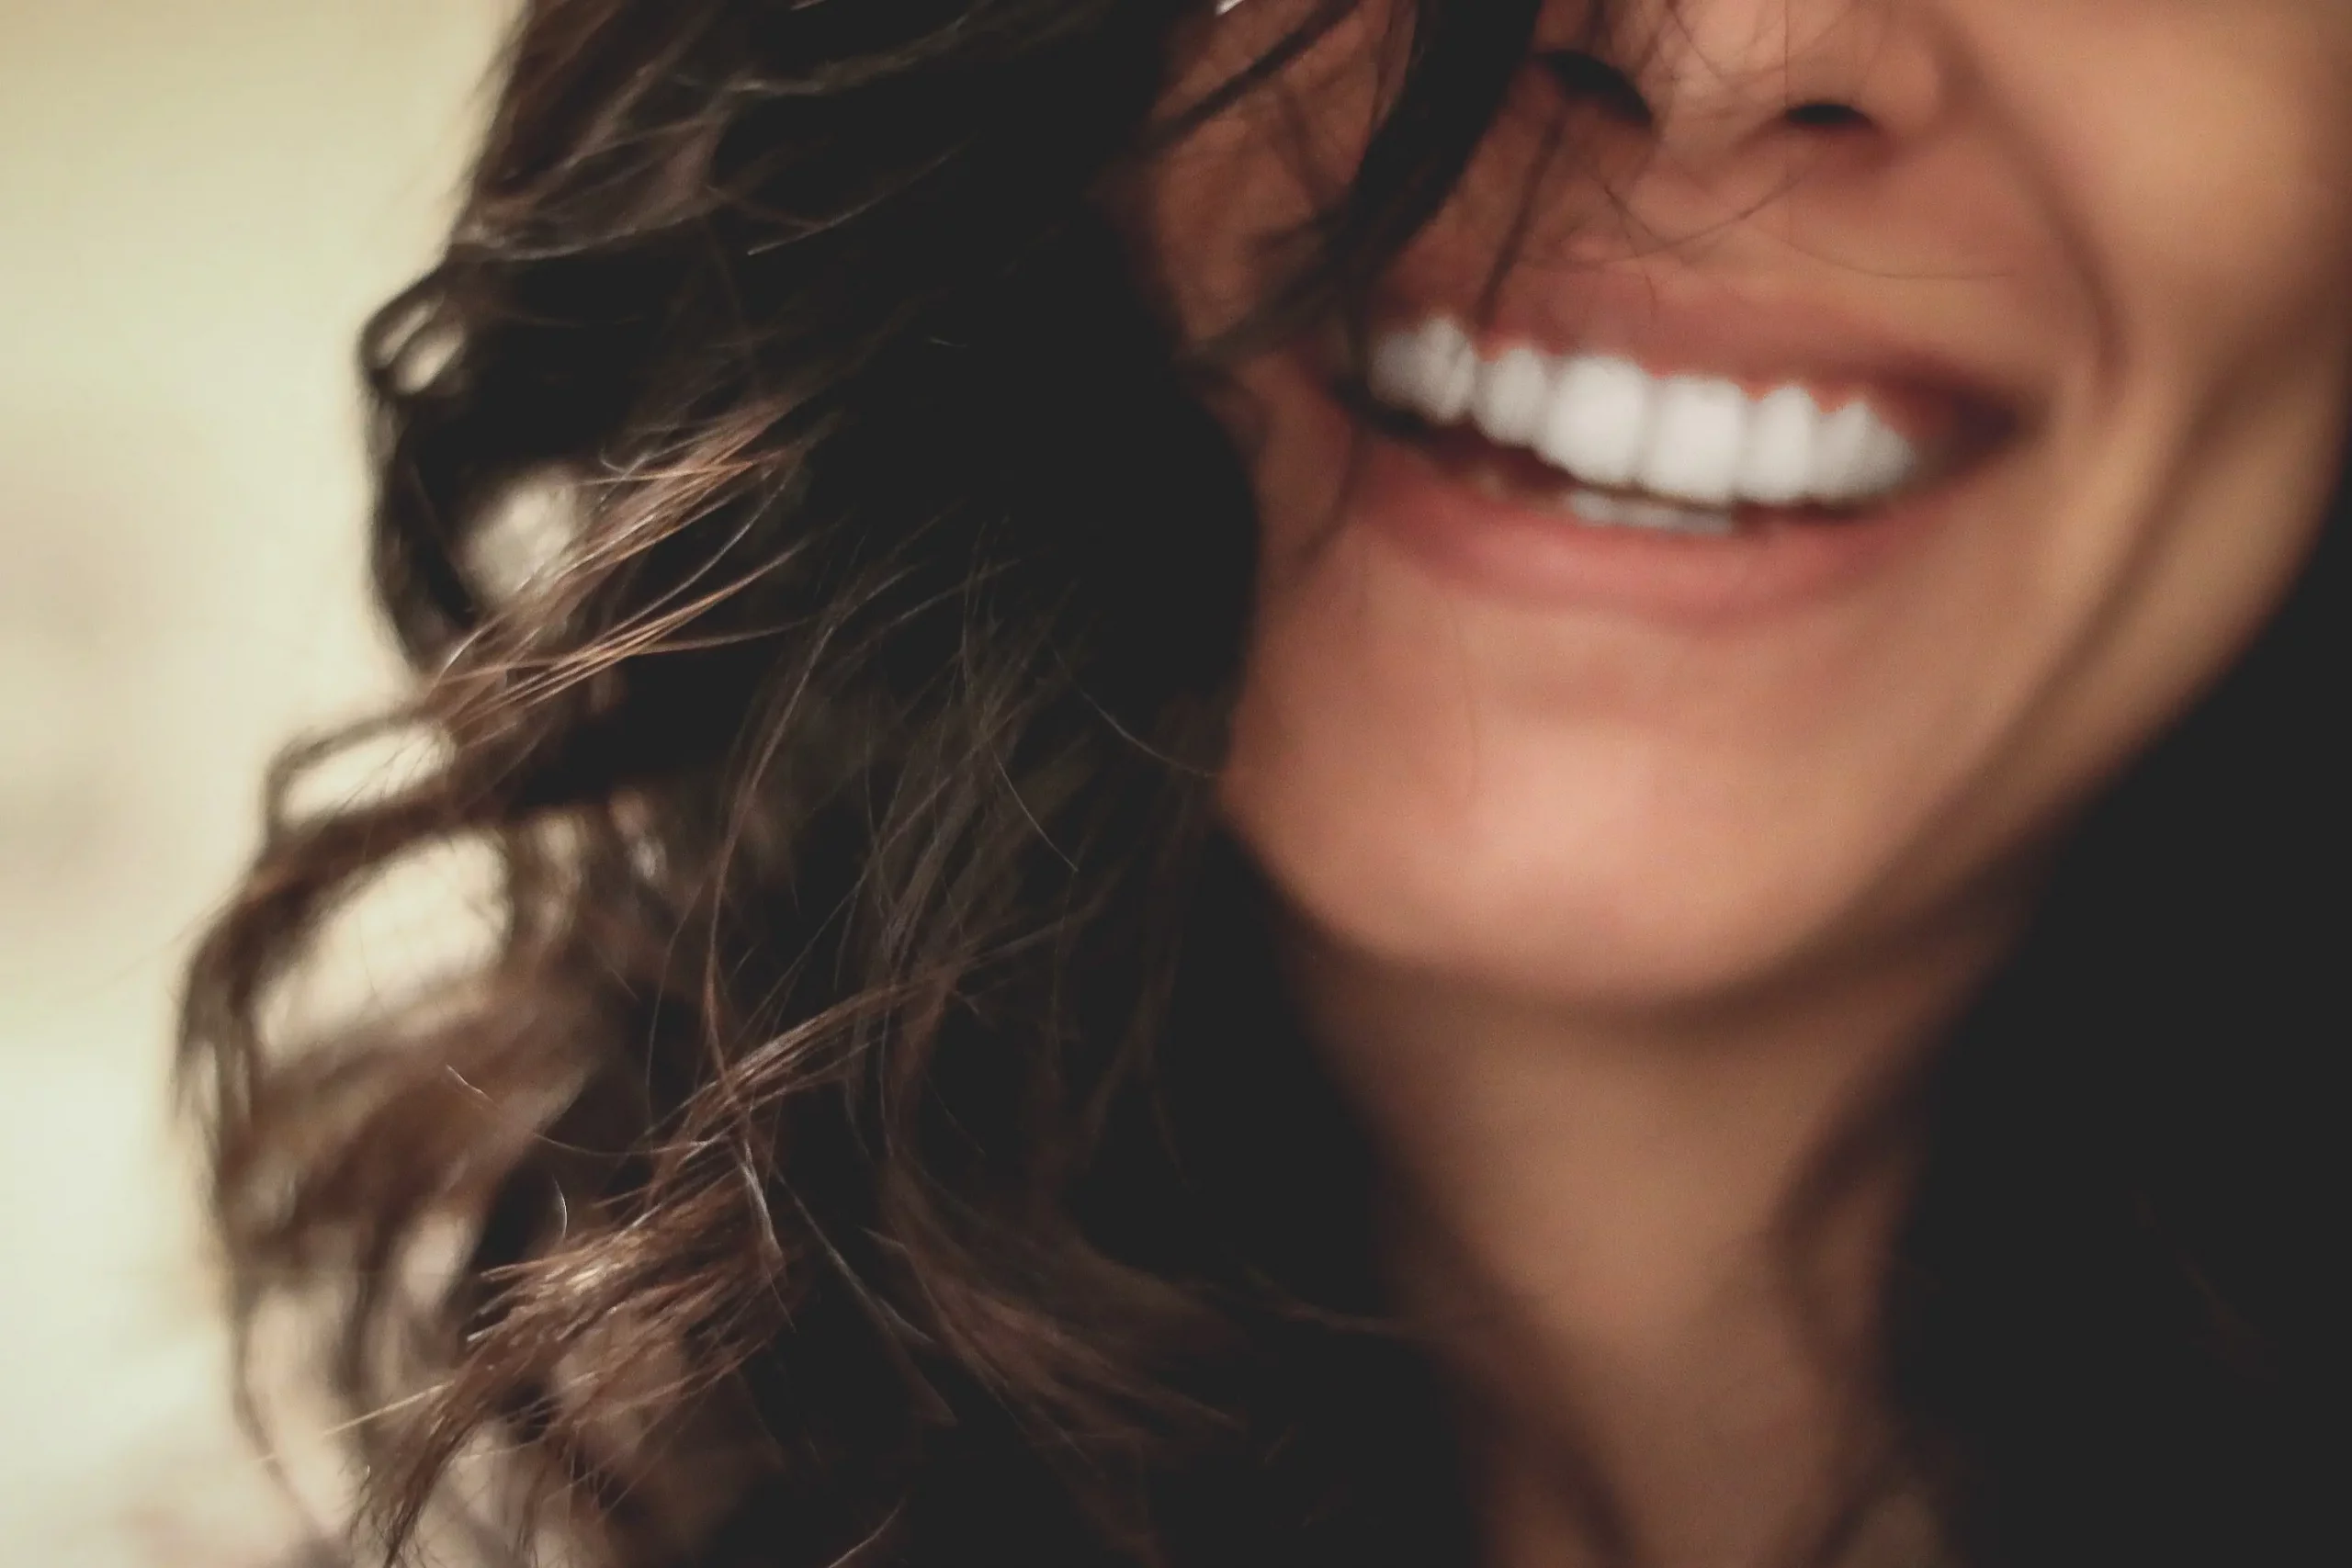 A girl smiling showing her white teeth